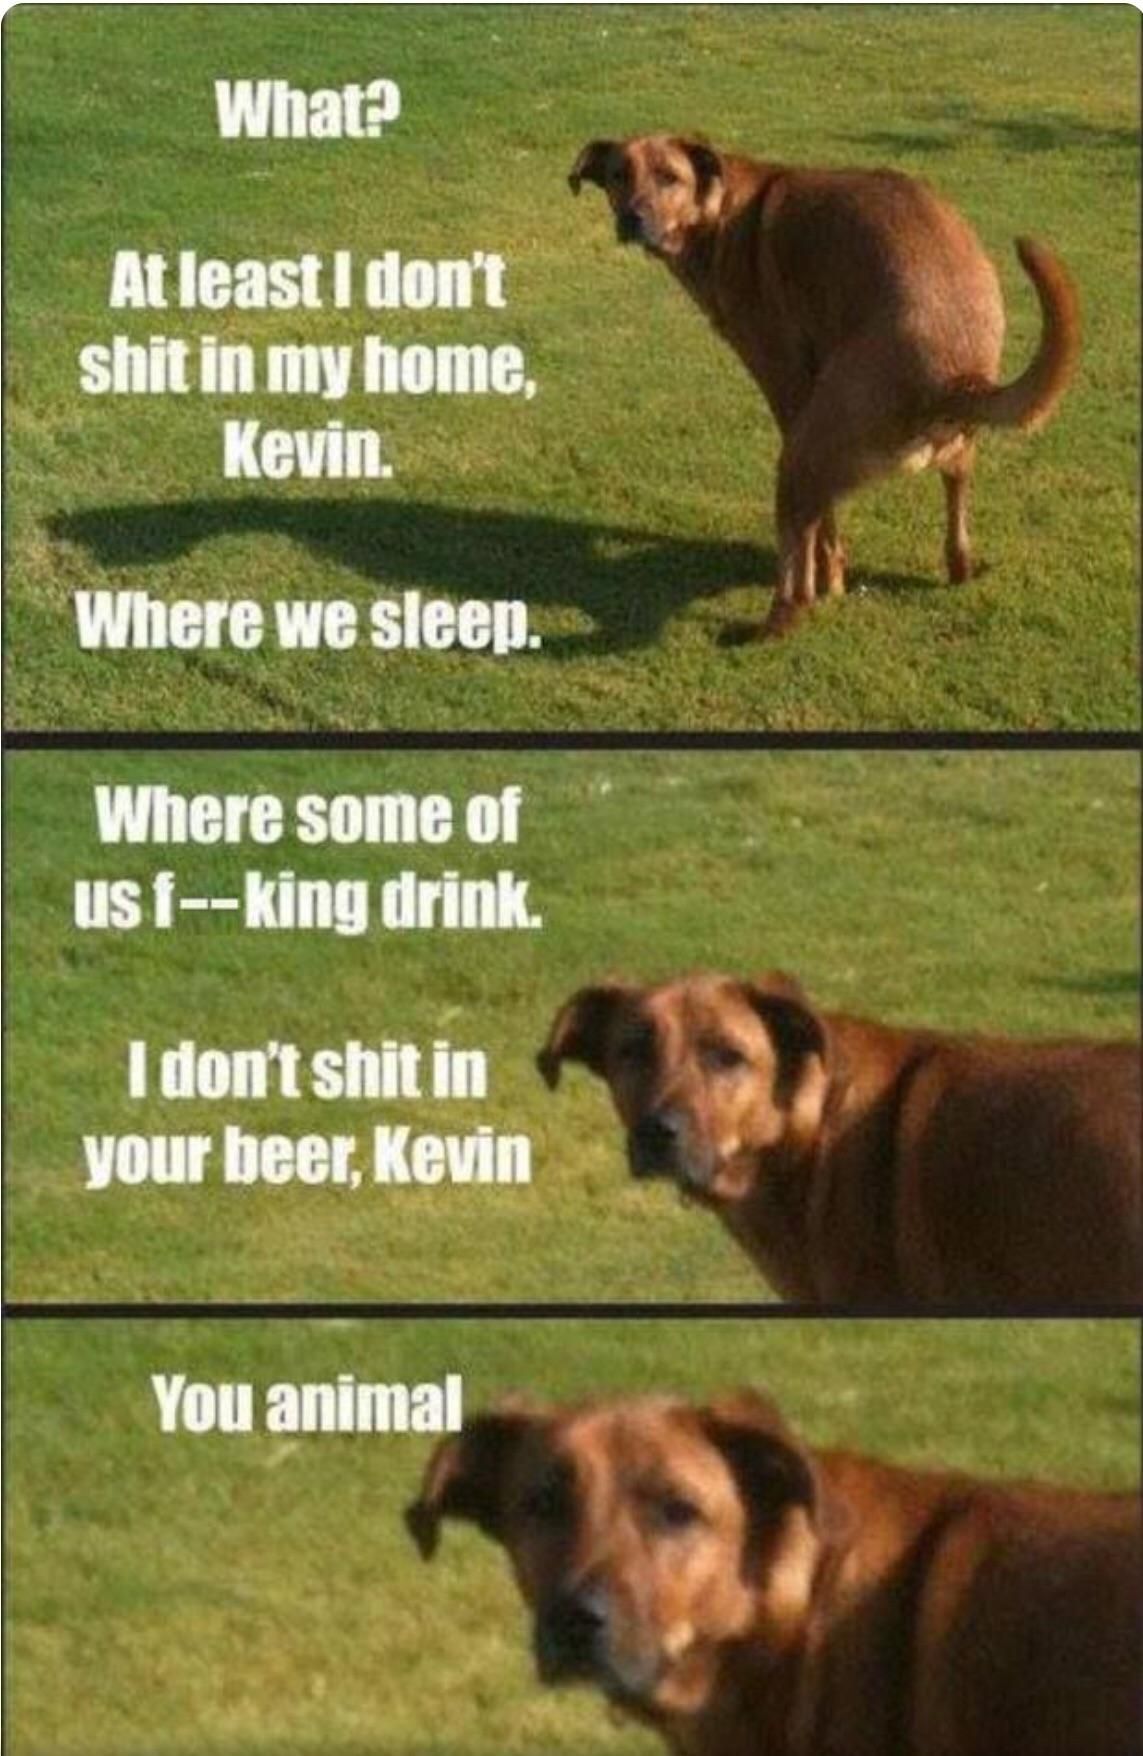 Yeah Kevin, WTF?